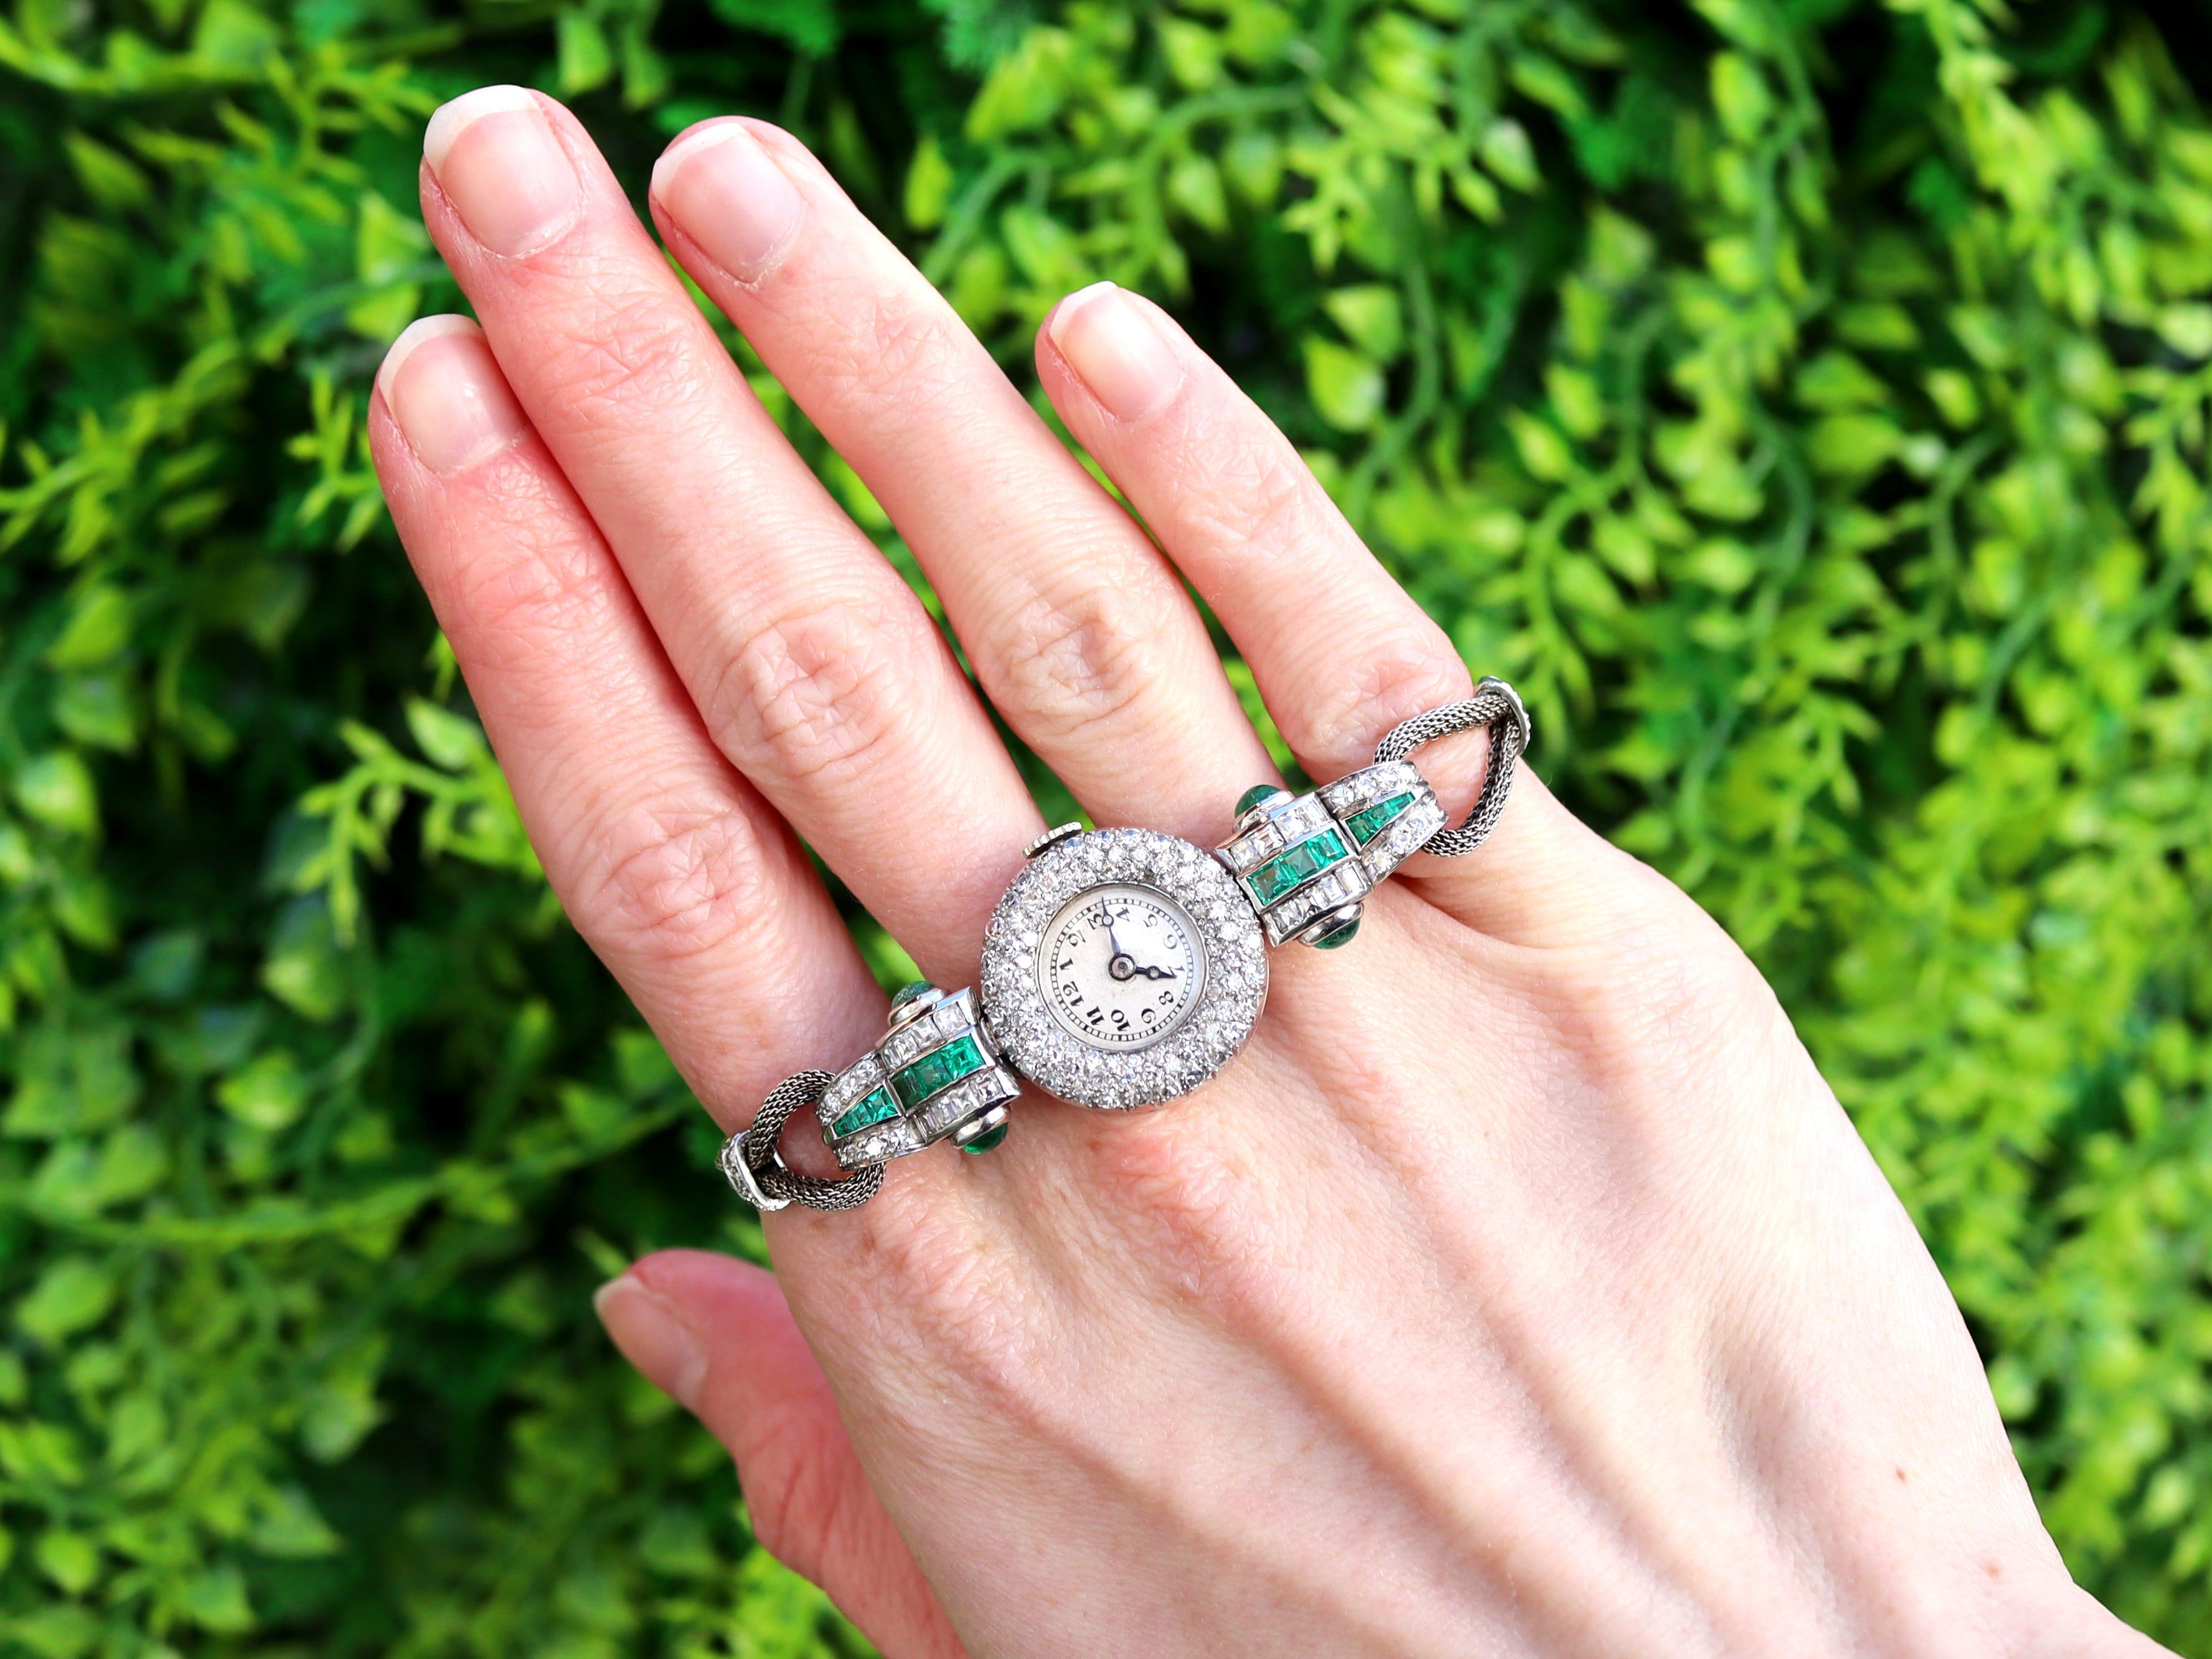 A stunning, fine and impressive antique Art Deco 1.25 carats emerald, 2.02 carats diamond and platinum watch with a 9 k white gold strap; part of our diverse ladies cocktail watch and emerald jewelry collections.

This stunning antique watch has